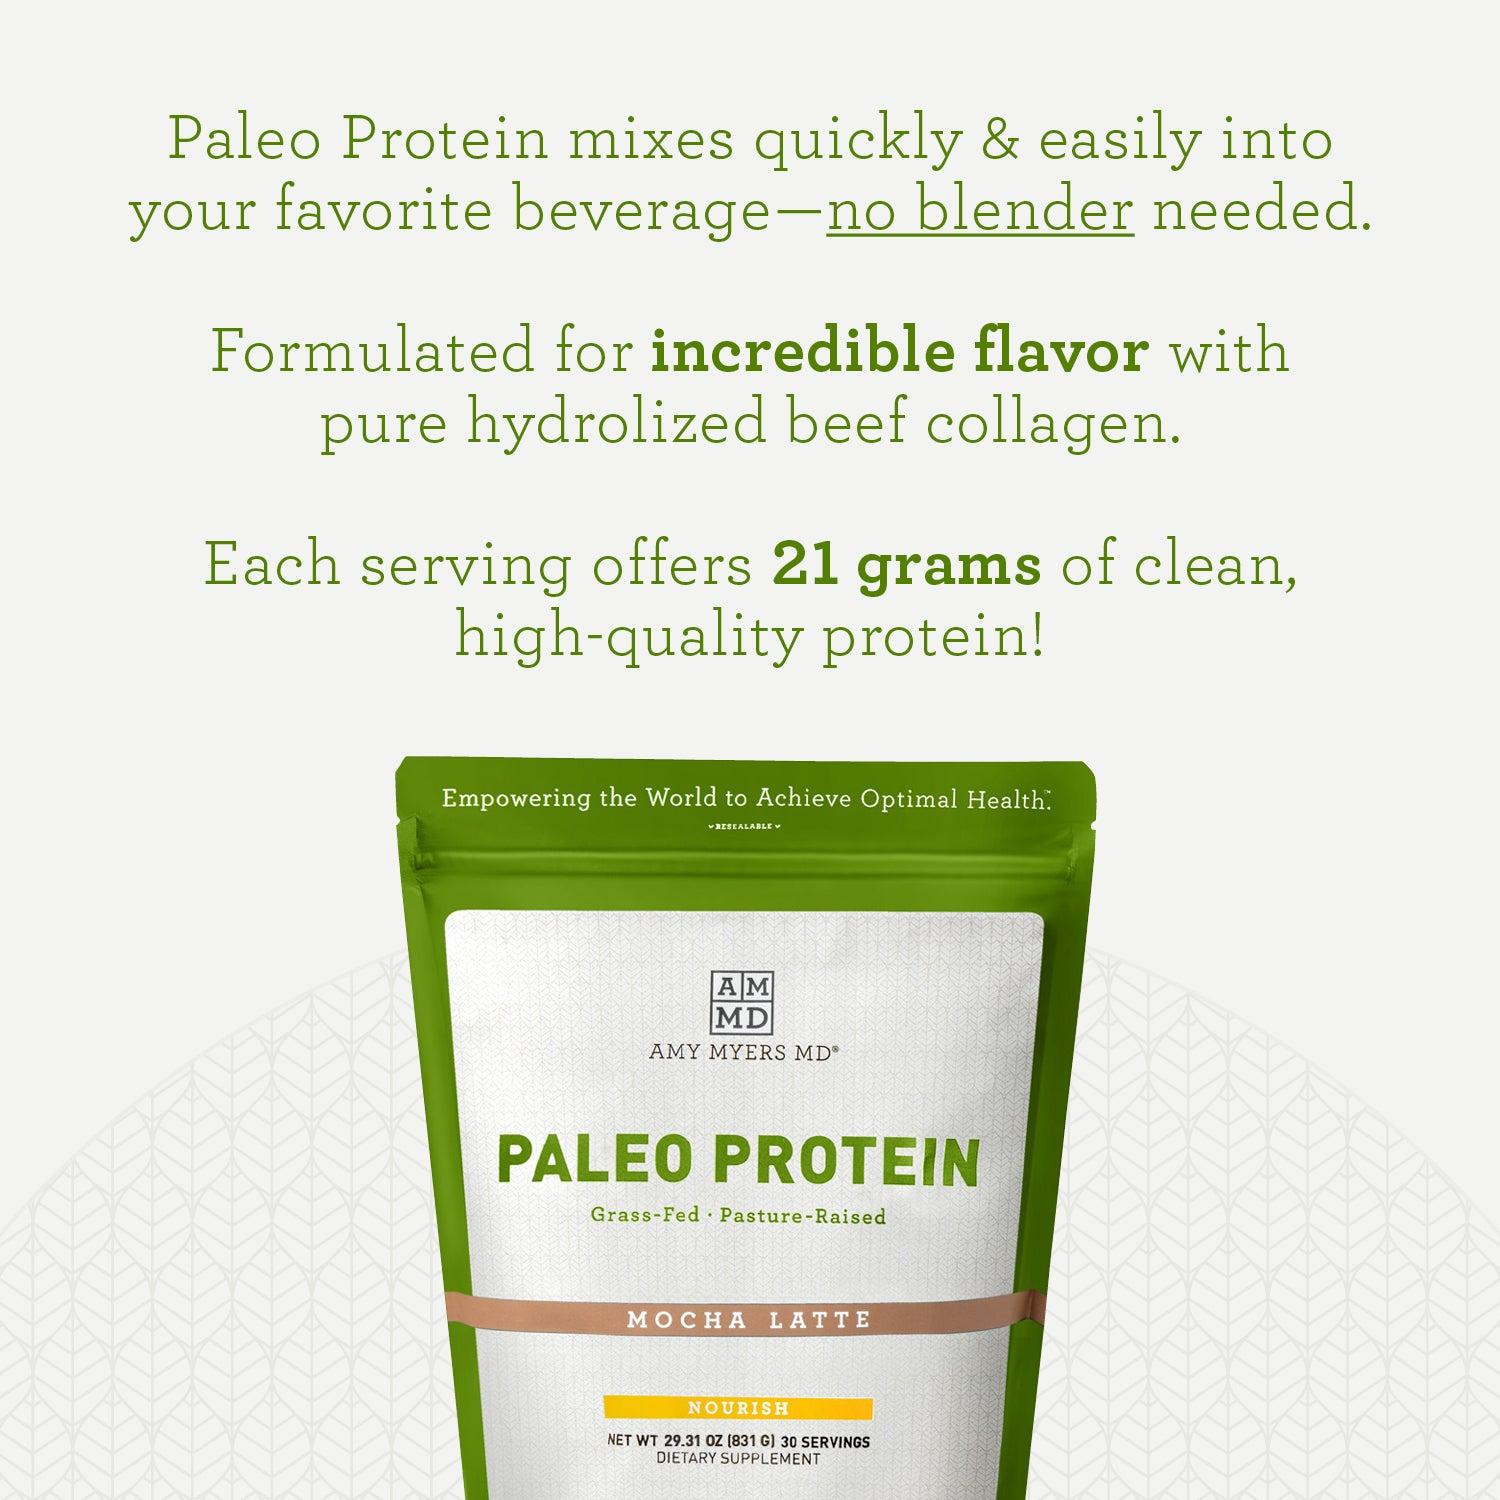 Inforgraphic: Paleo protein mixes quickly & easily into your favorite beverage--no blender needed. Formulated for incredible flavor with pure hydrolized beef collagen. Each serving offers 21 grams of clean, high-quality protein!.